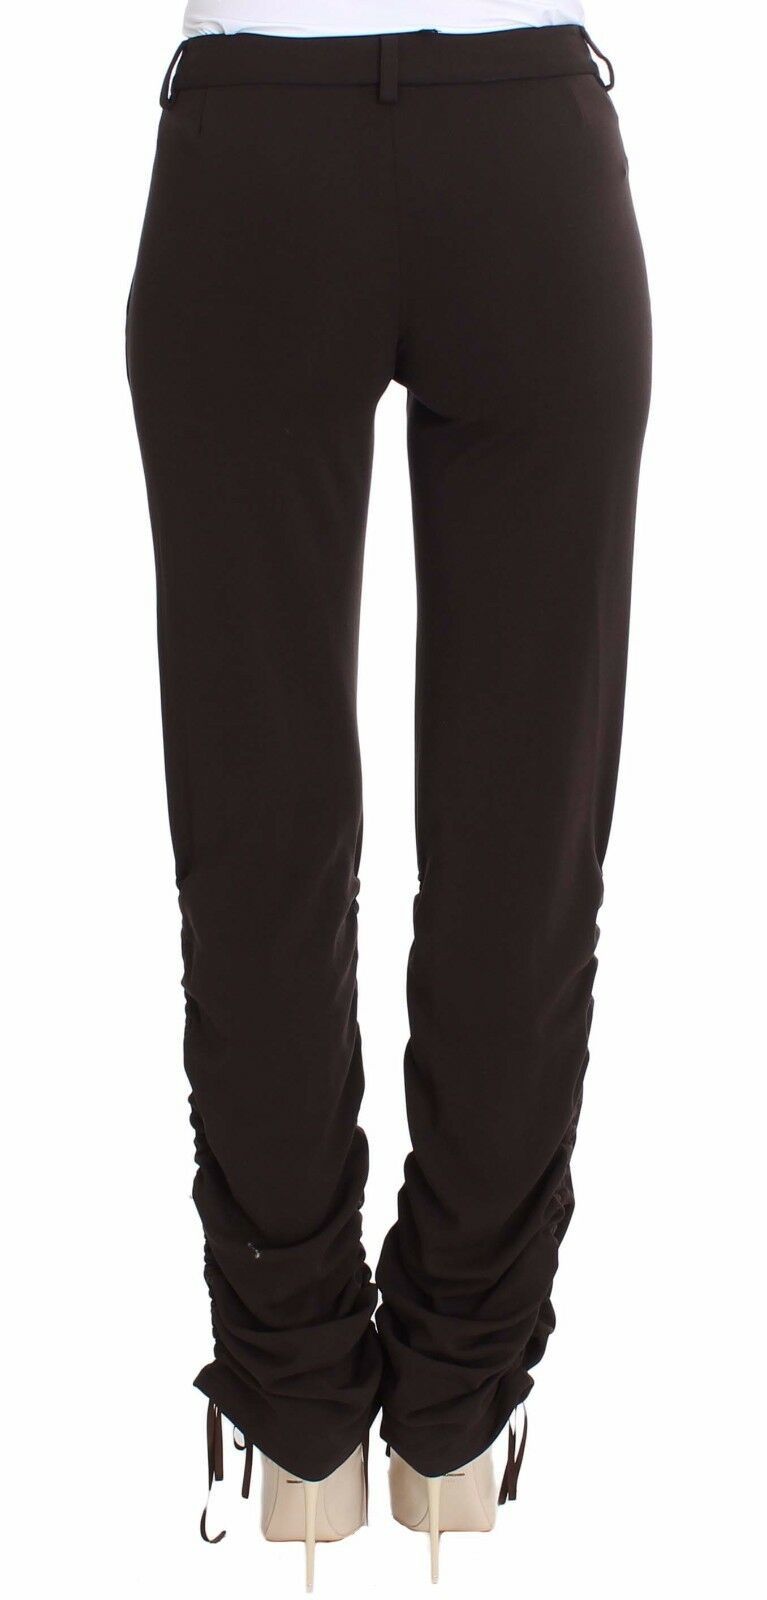 Ermanno Scervino Chic Brown Casual Trousers for Sophisticated Style